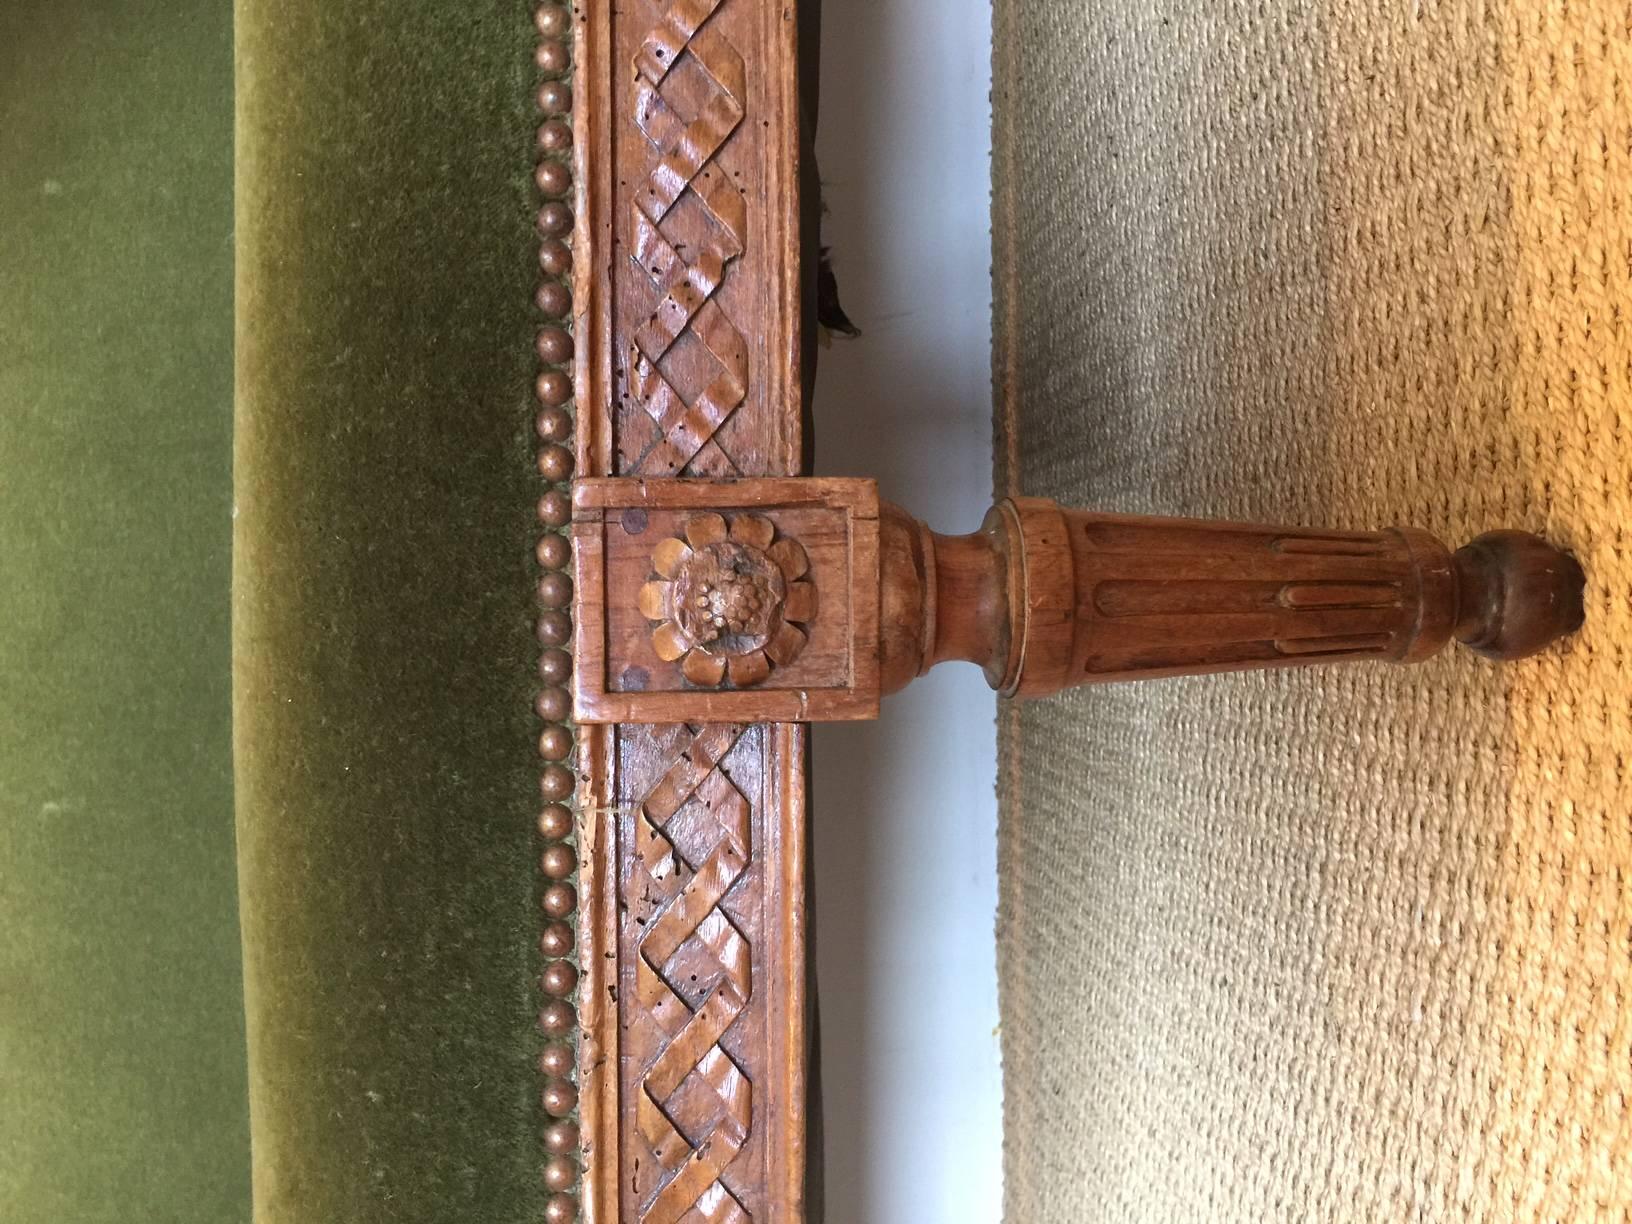 Elegant, green mohair 19th century sofa with intricately carved detail and nailhead trim.
 